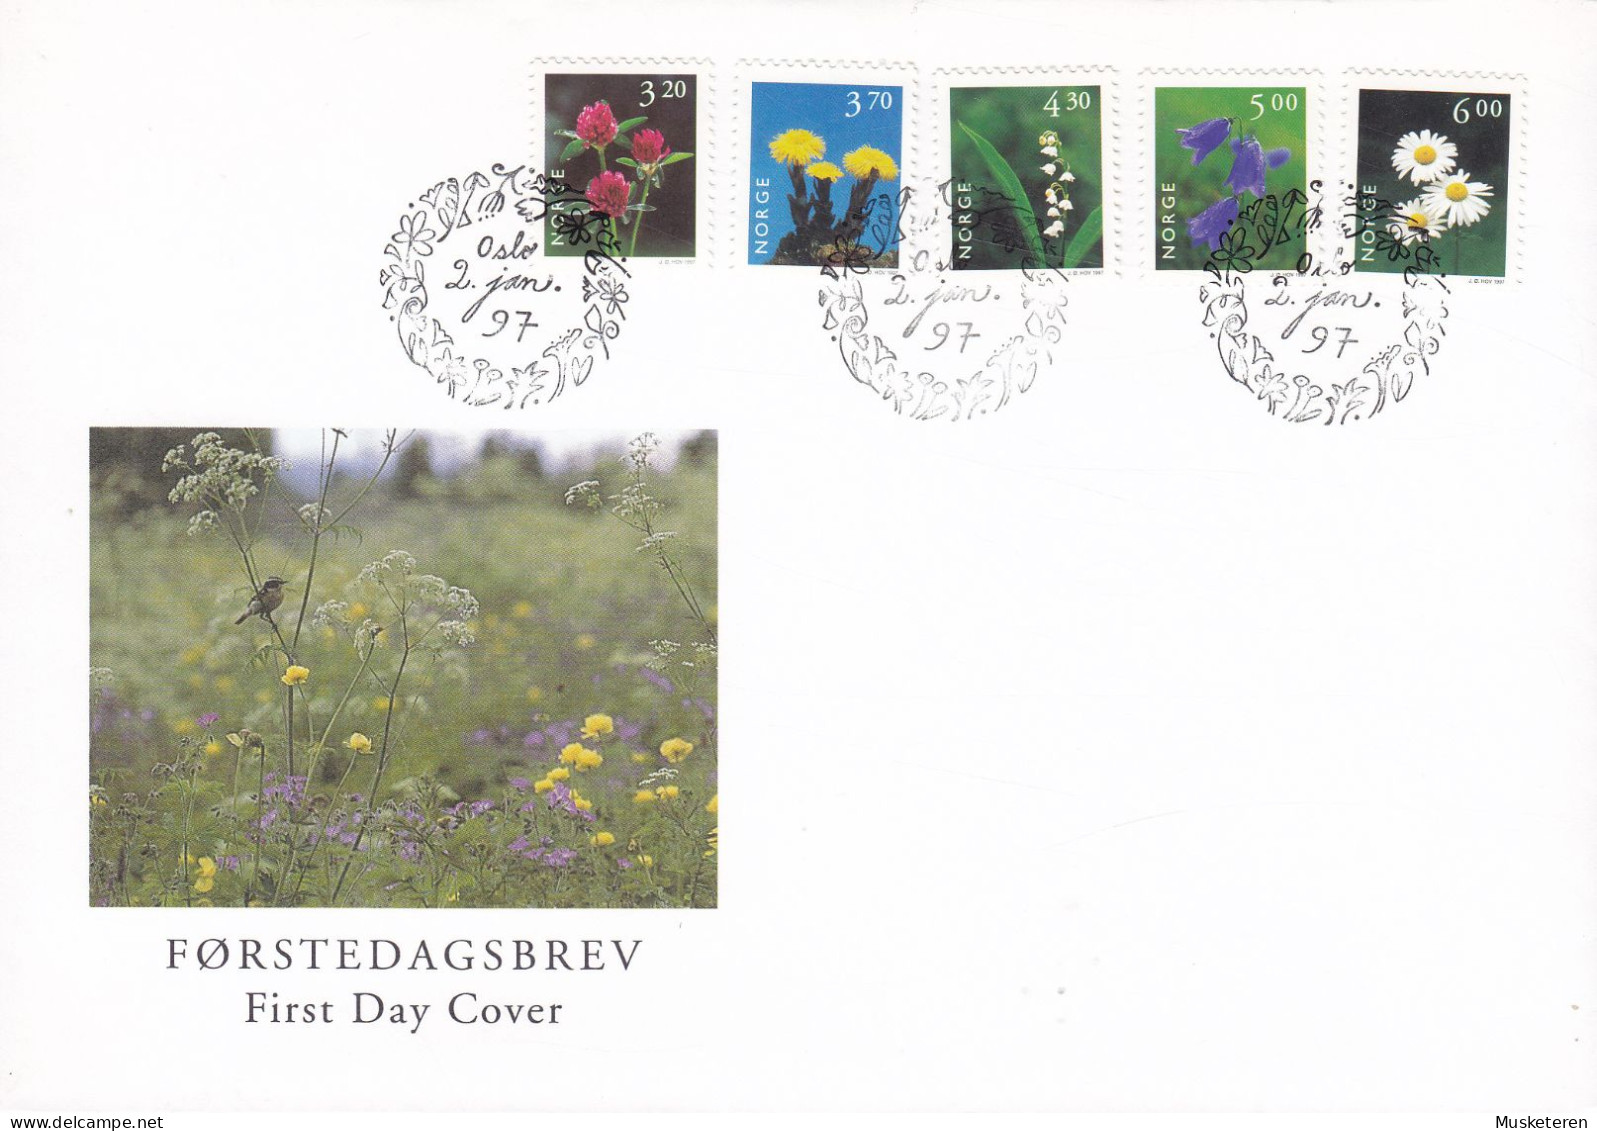 Norway 1997 FDC Cover Ersttags Brief Pflanzen Plants Complete Set !! - FDC